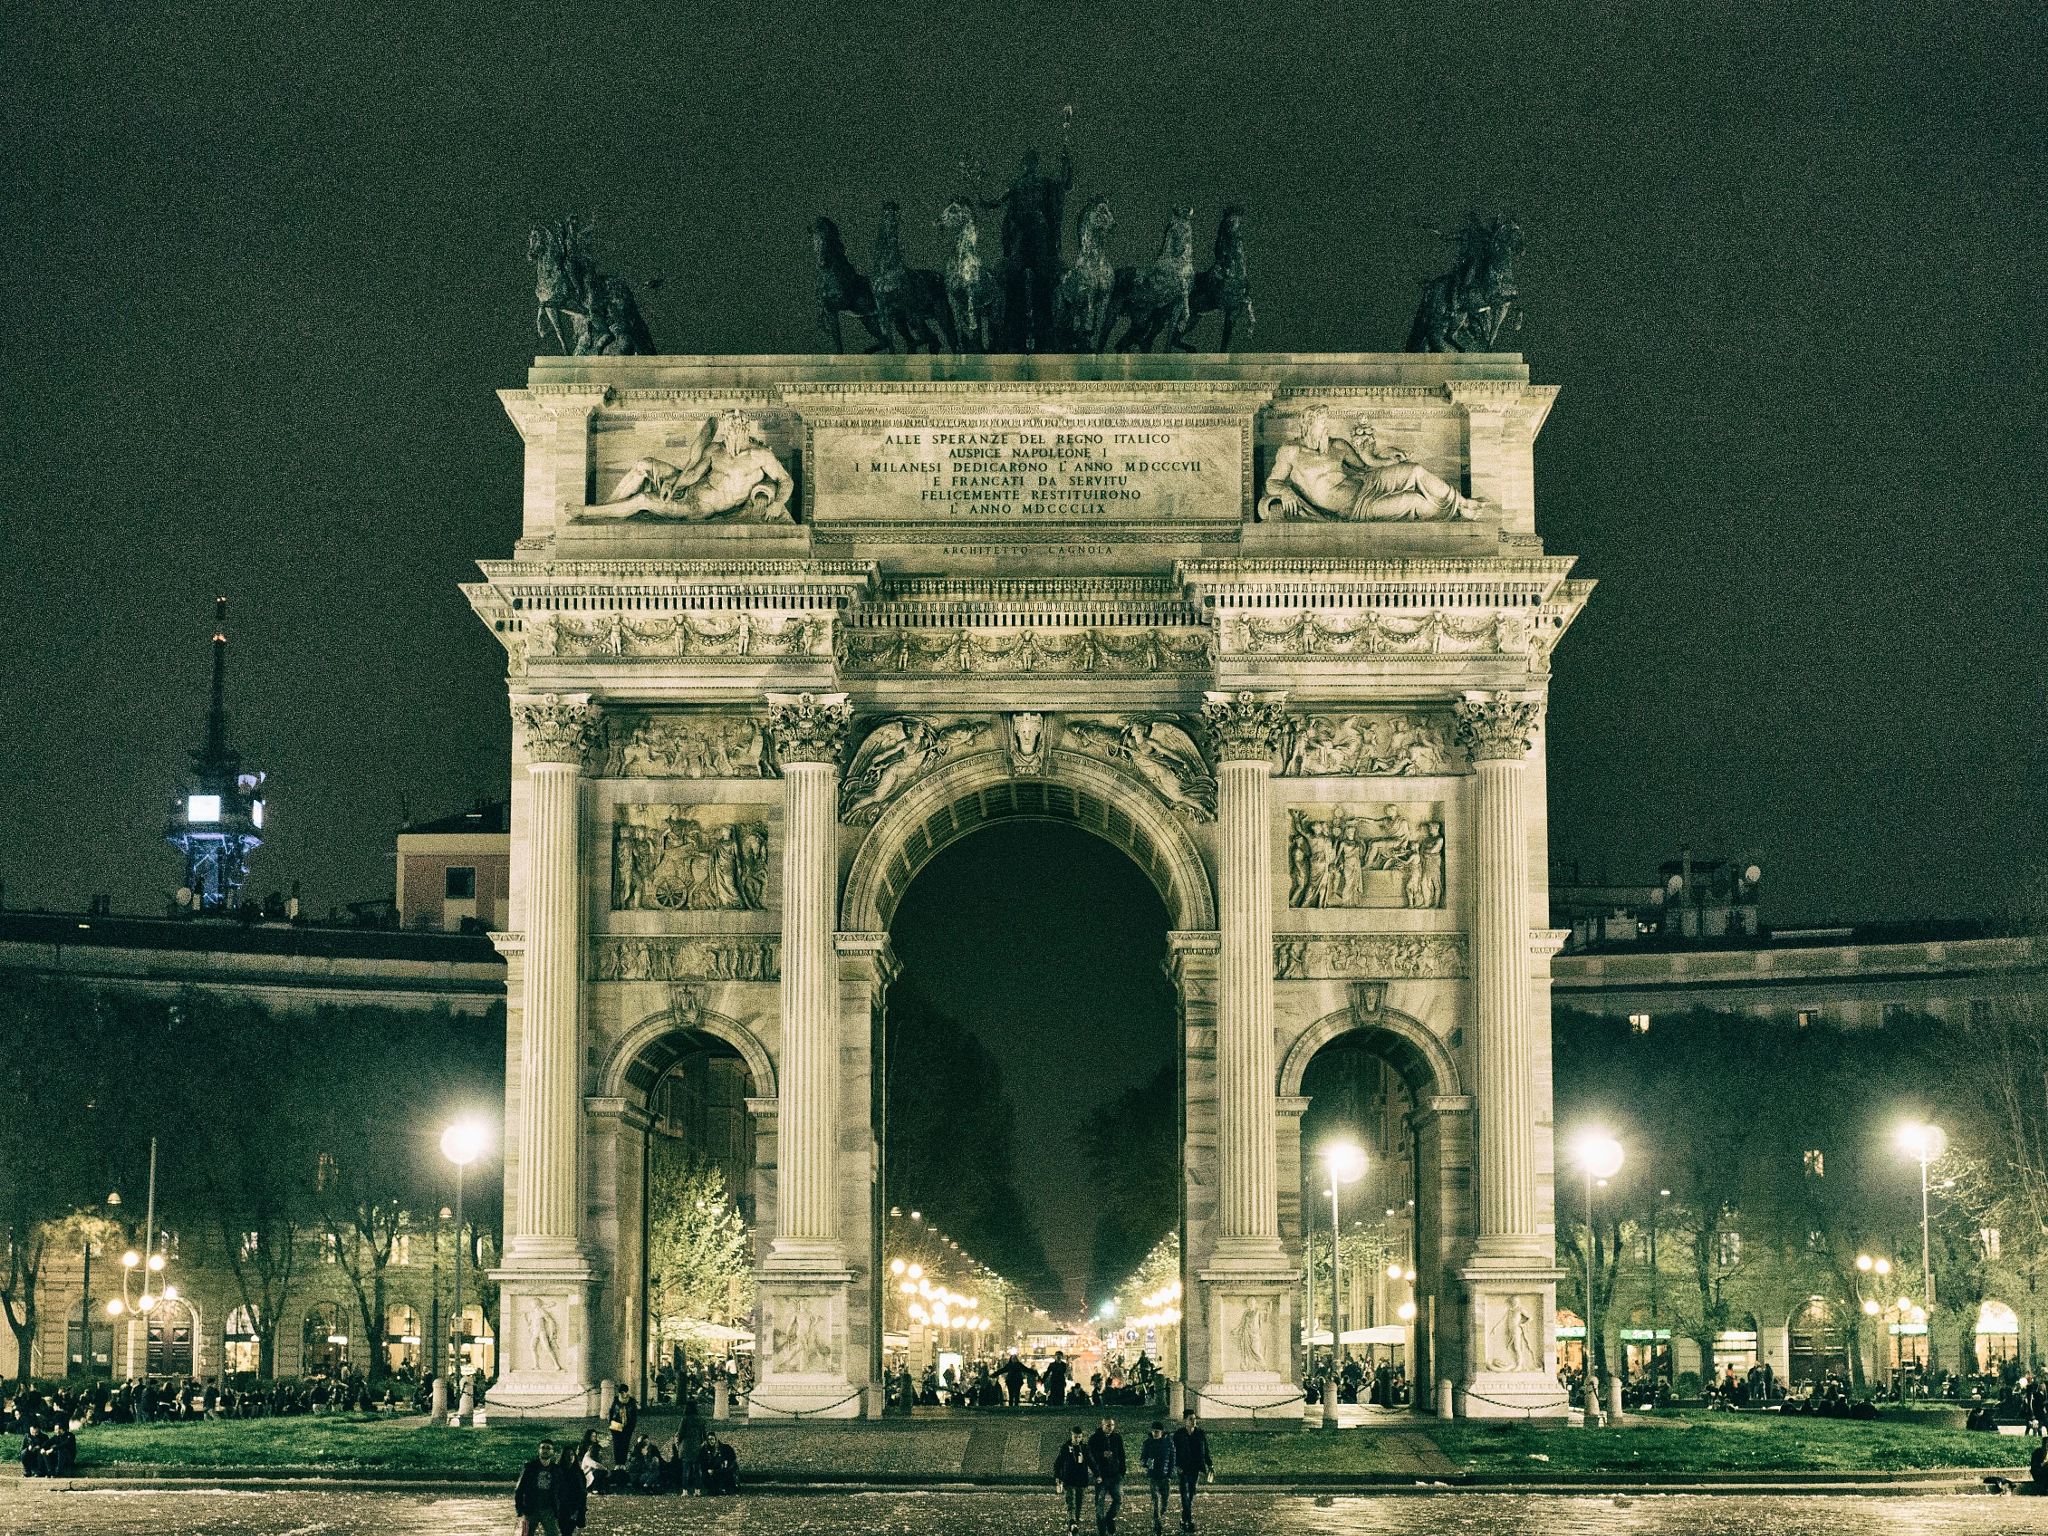 Olympus OM-D E-M10 + Sigma 30mm F2.8 DN Art sample photo. Arco della pace.. vintage photography